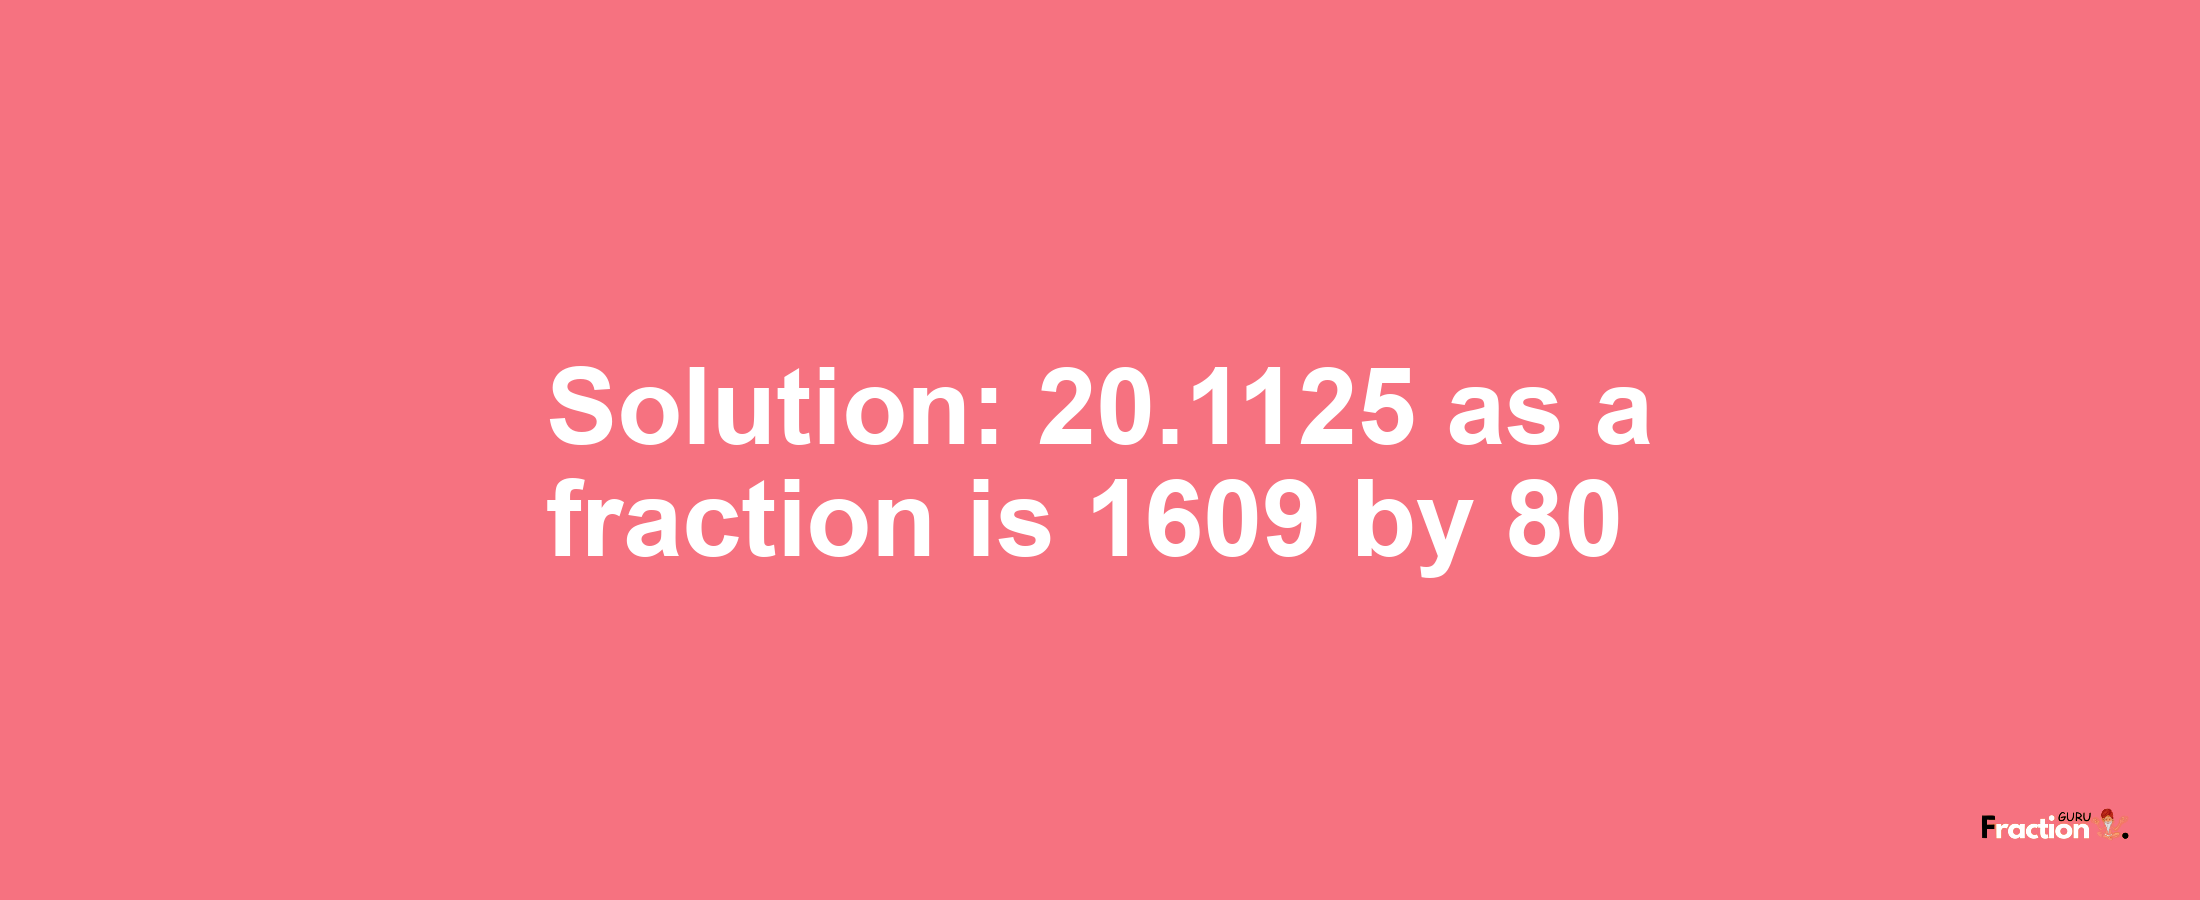 Solution:20.1125 as a fraction is 1609/80